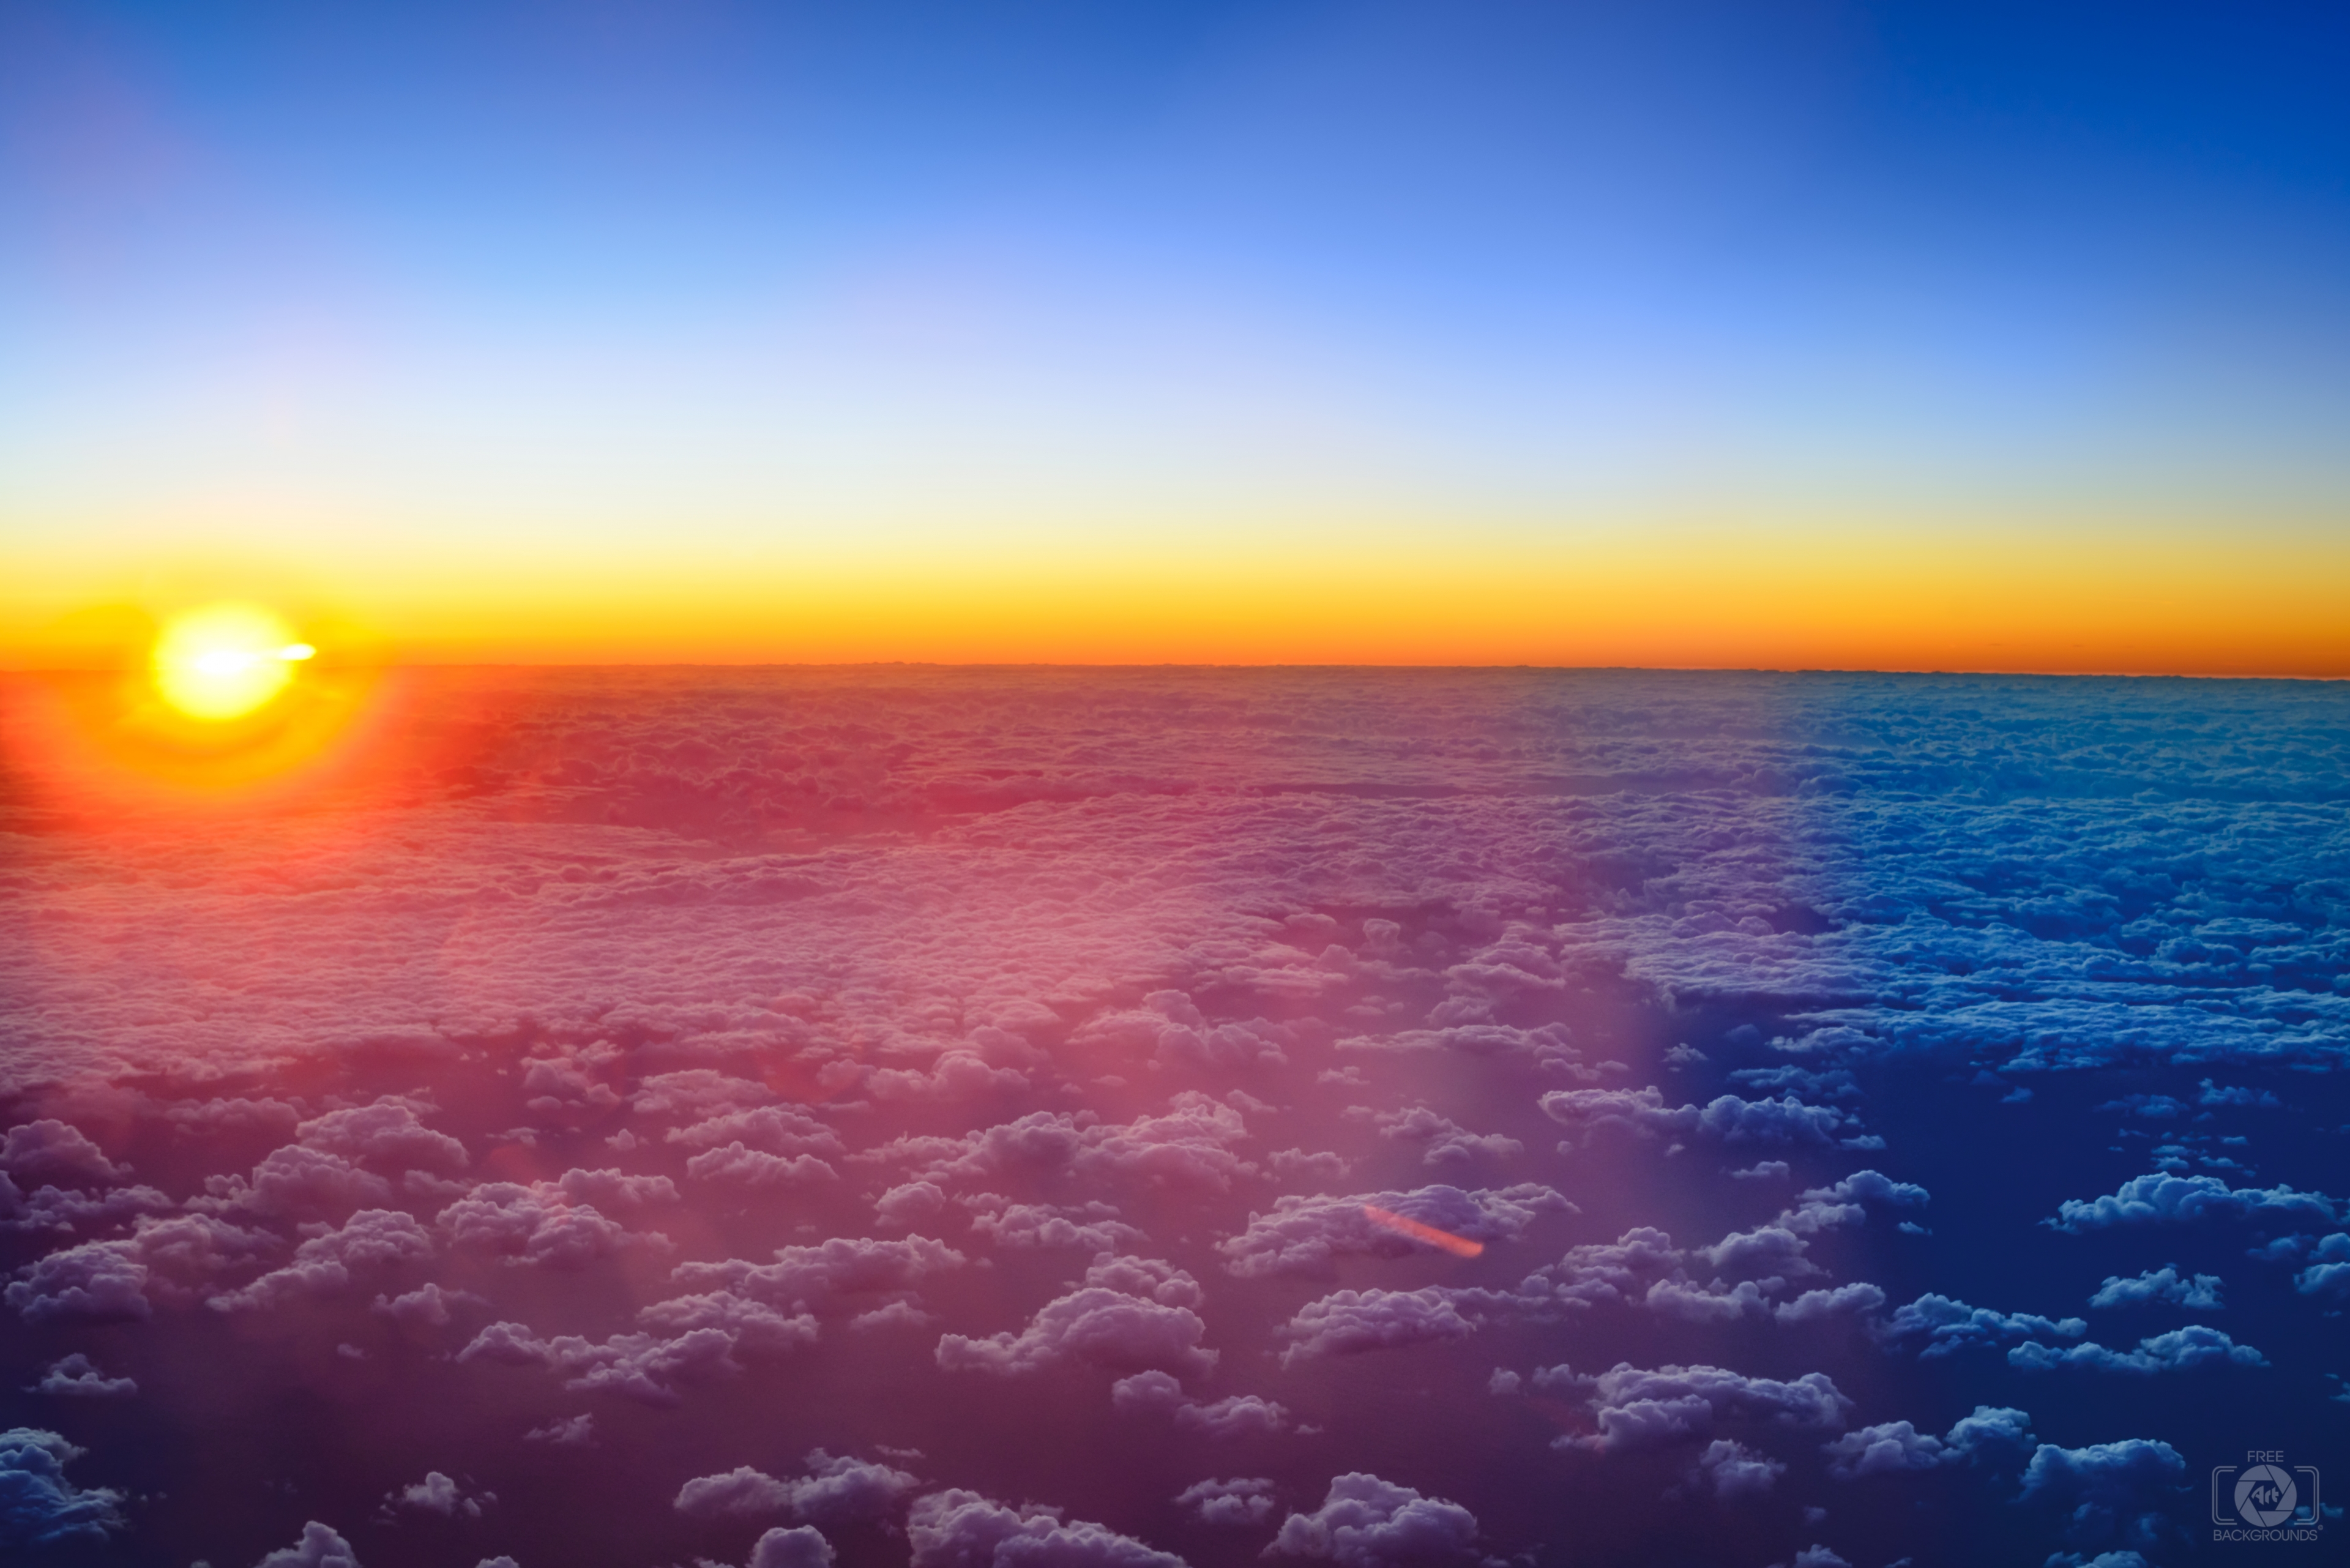 sky clouds sunset background